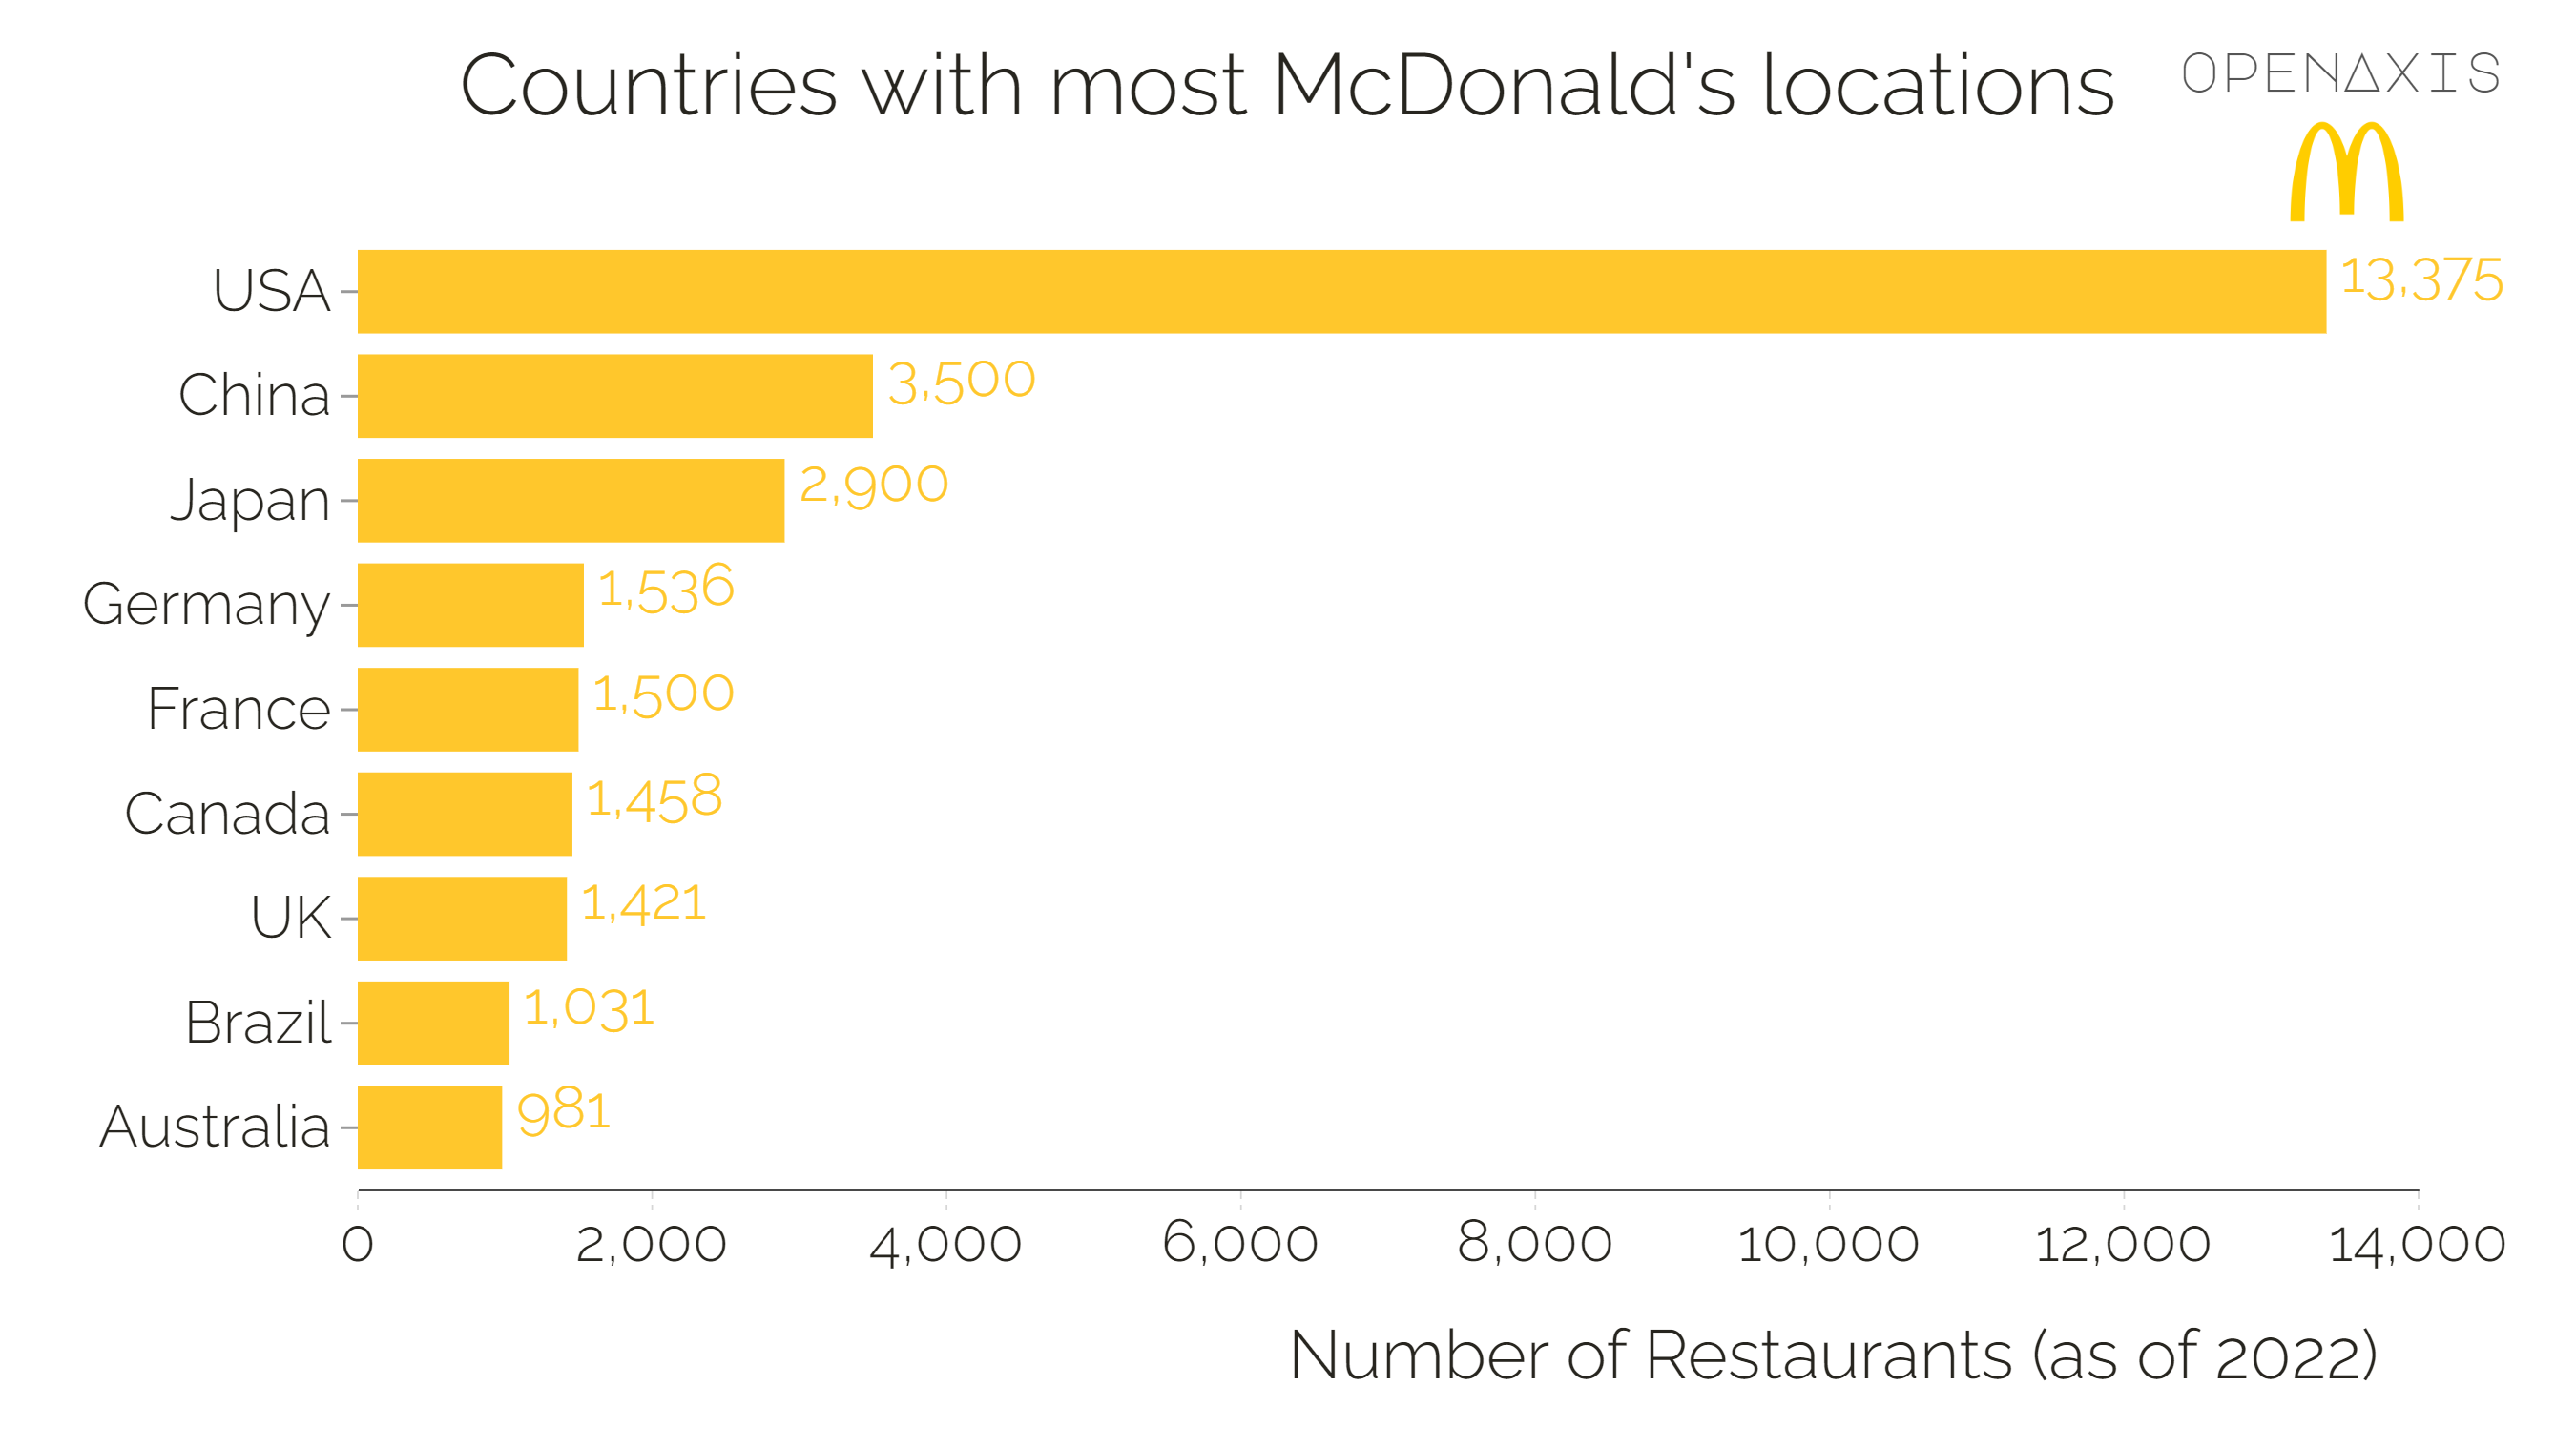 "Countries with most McDonald's locations"